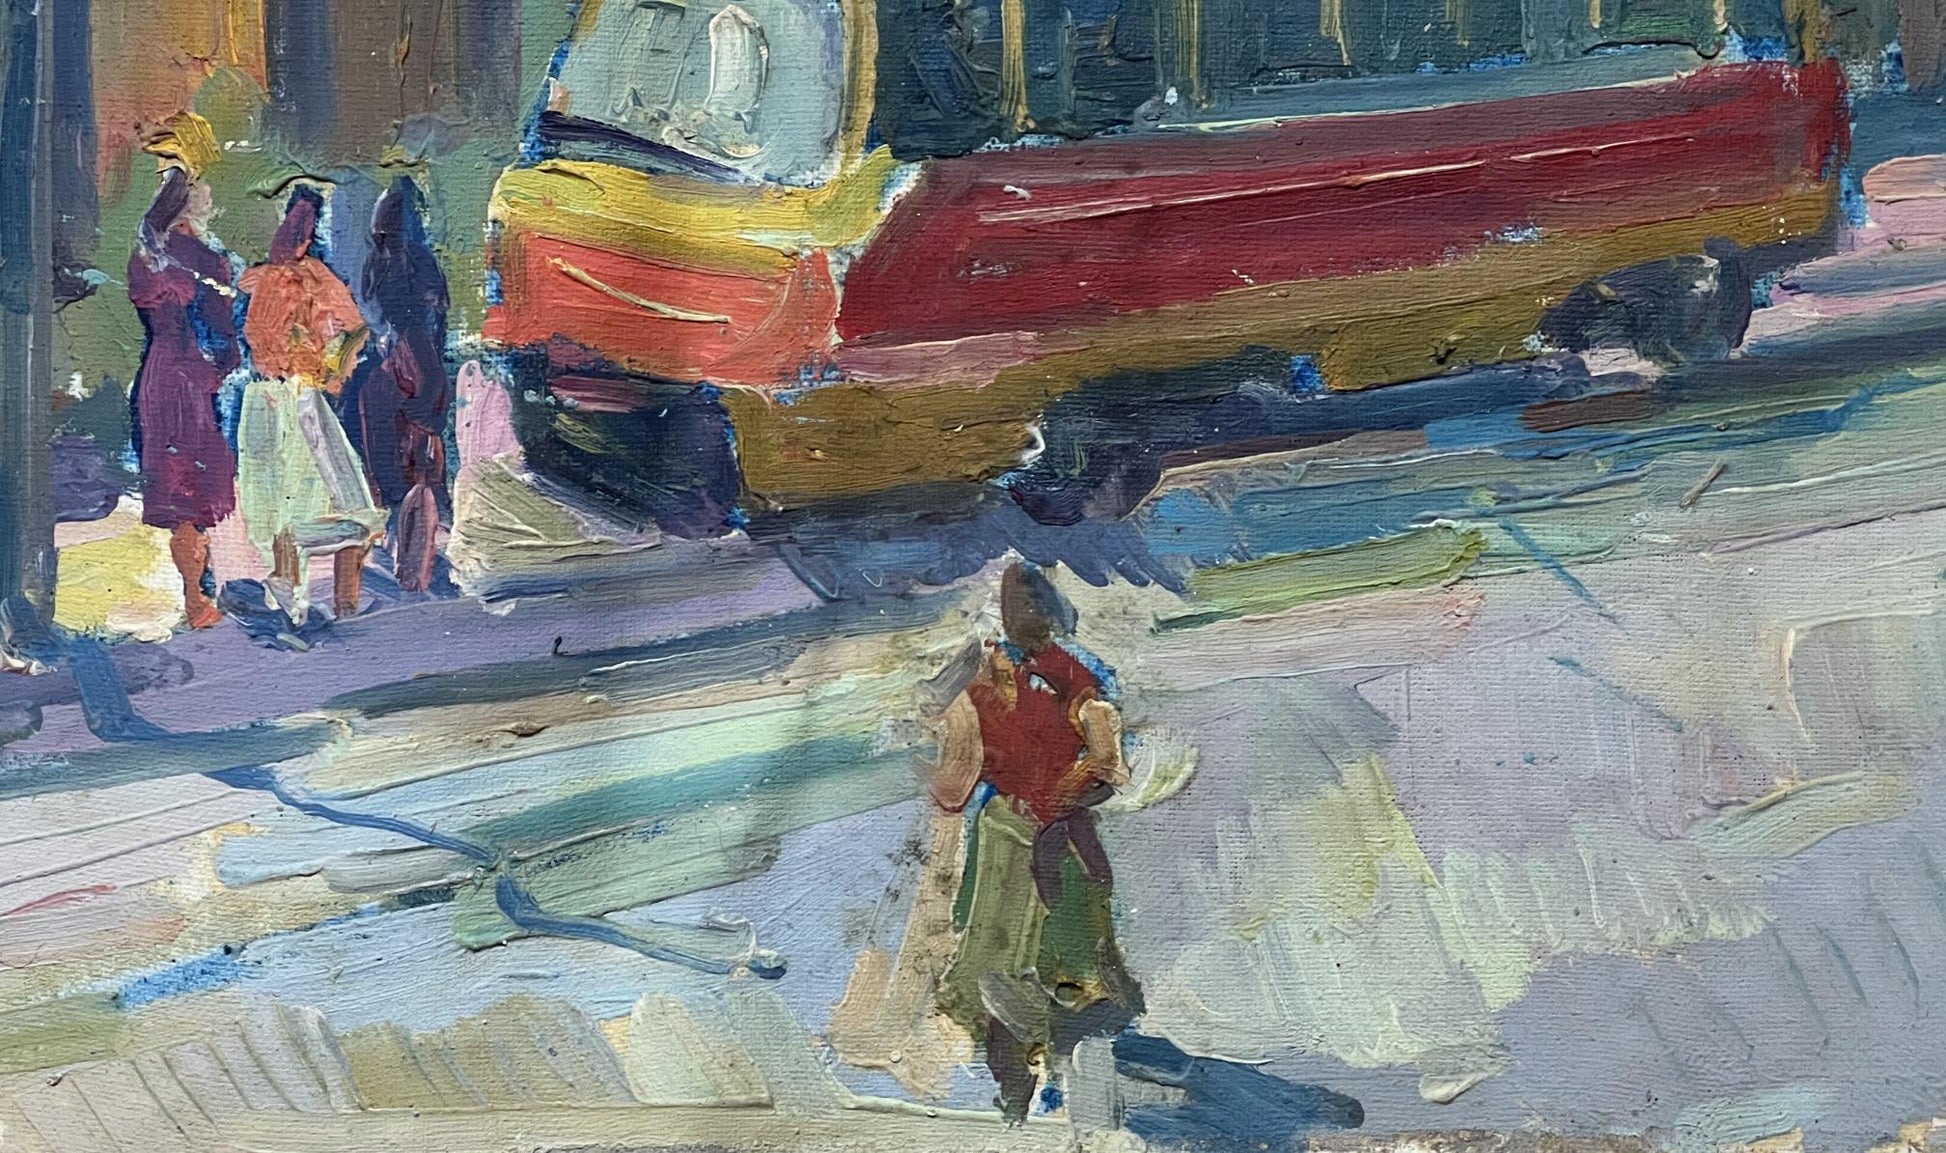 "Abstract Commute" painted in oil by Peter Dobrev, exploring the bus stop motif